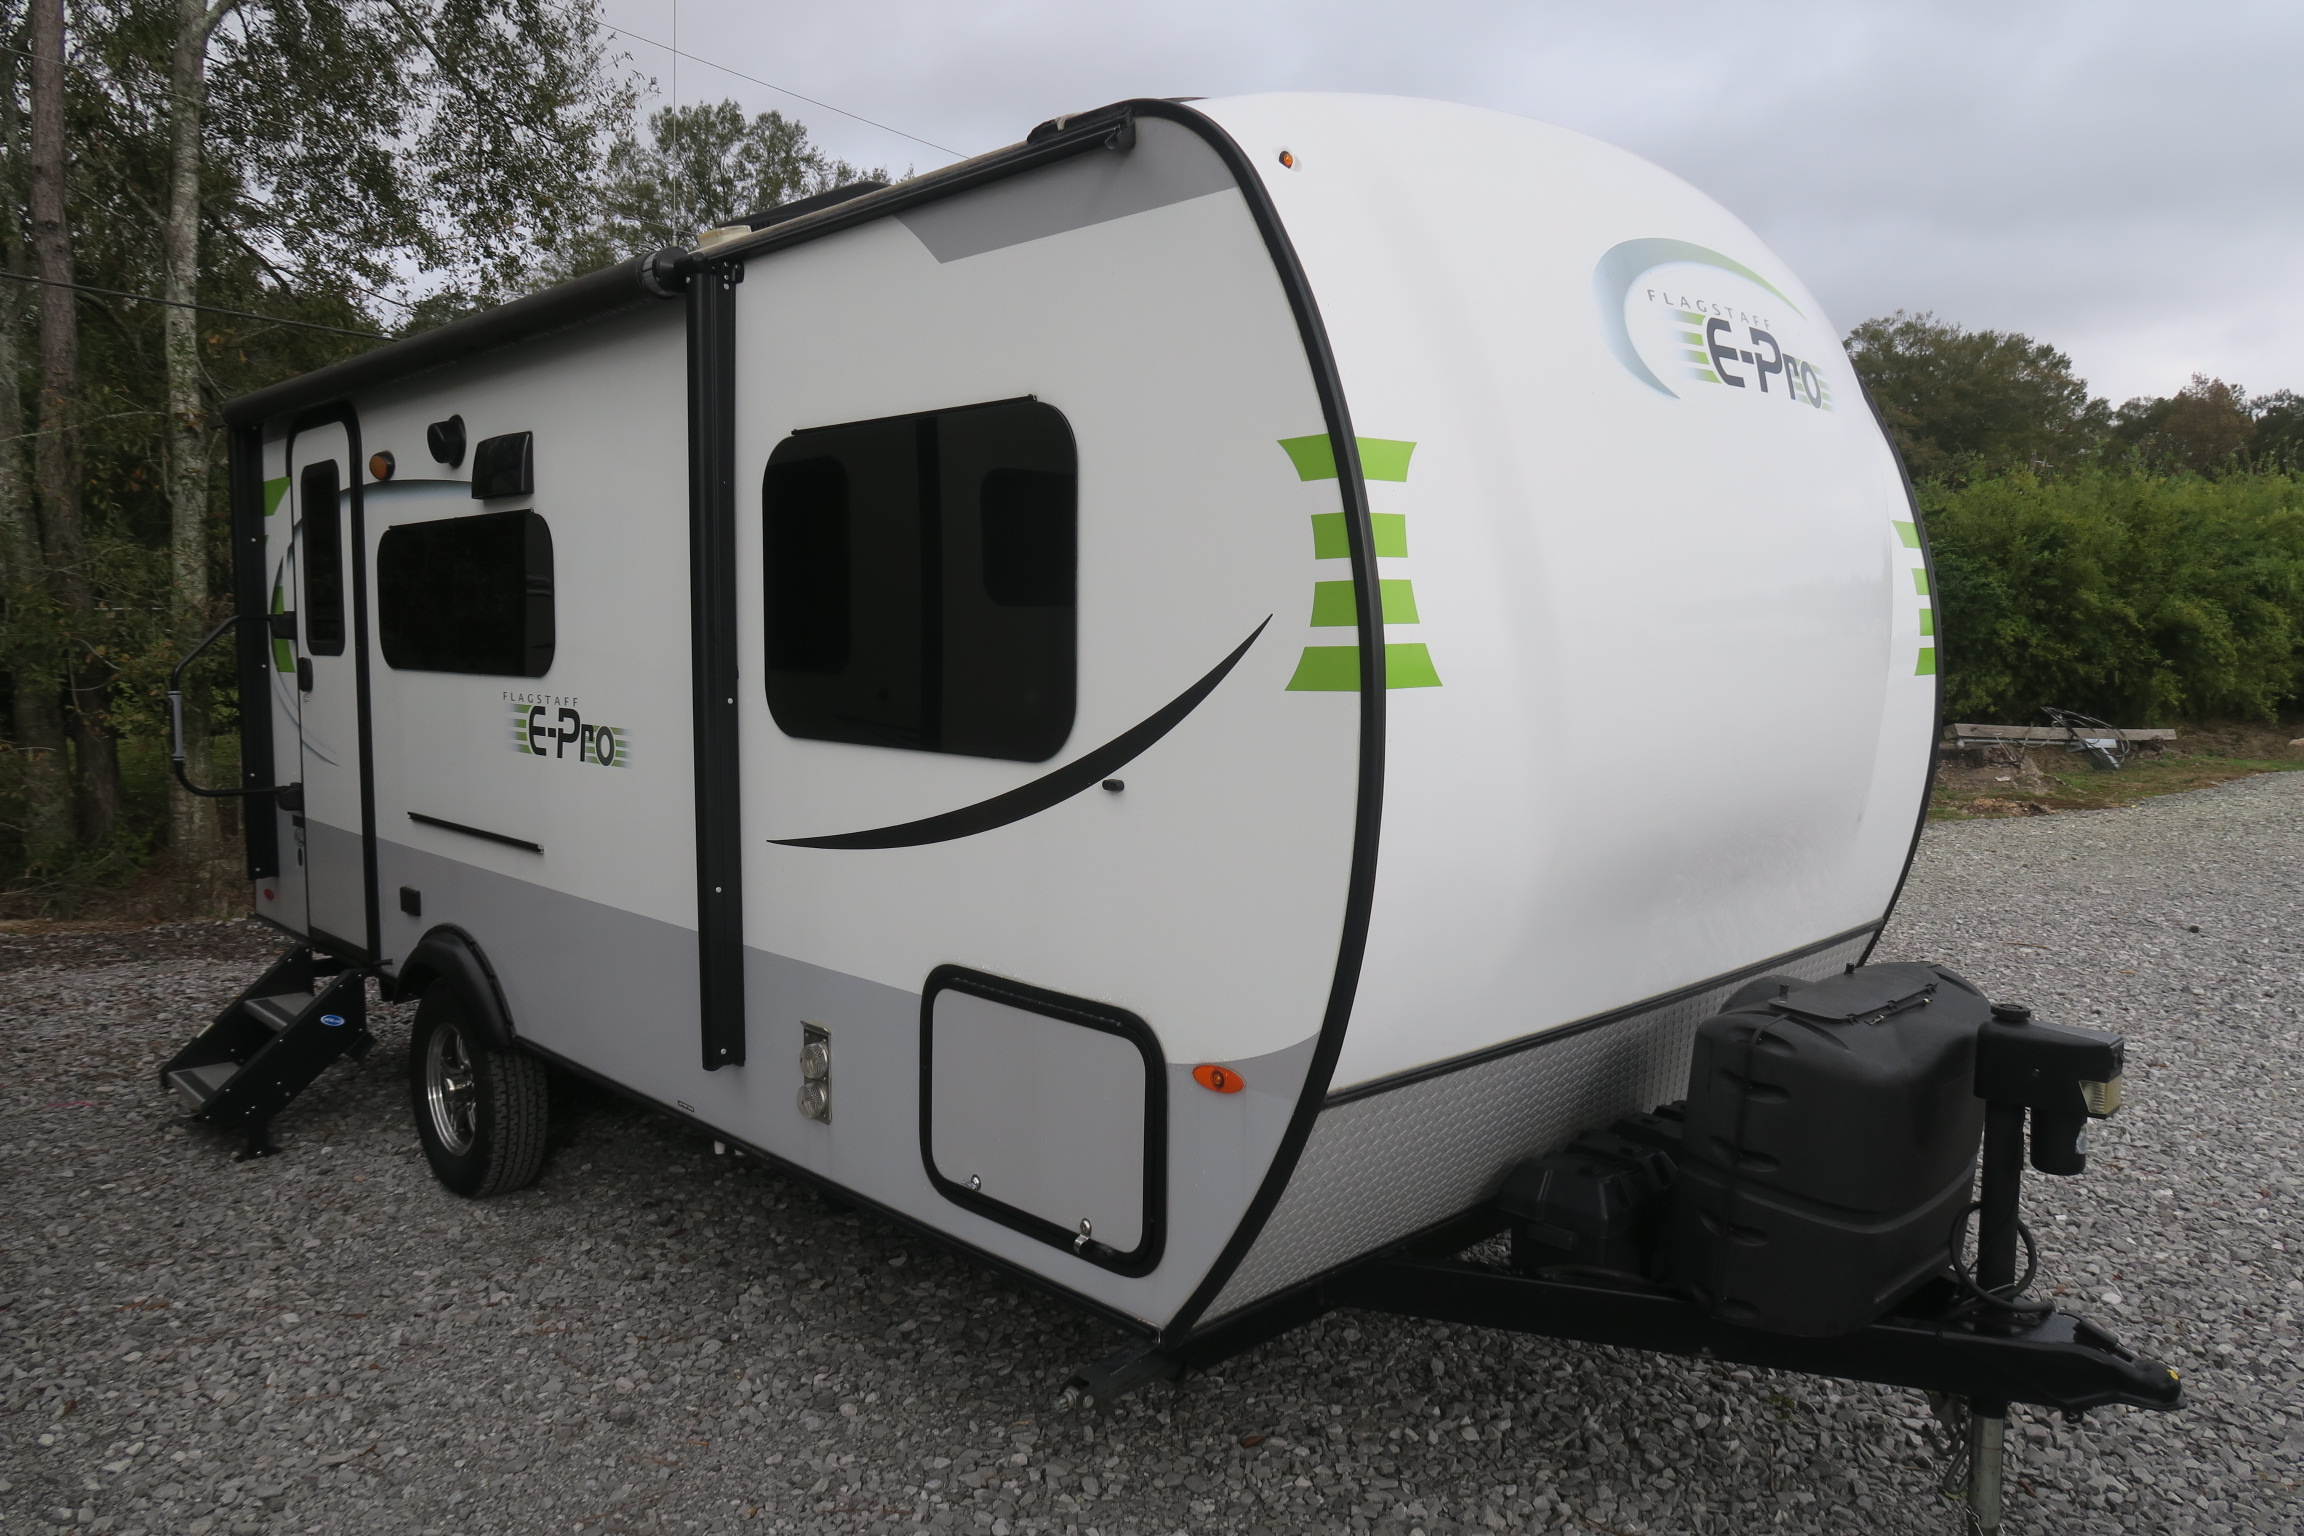 Used 2018 Flagstaff E Pro 19fbs Overview Berryland Campers